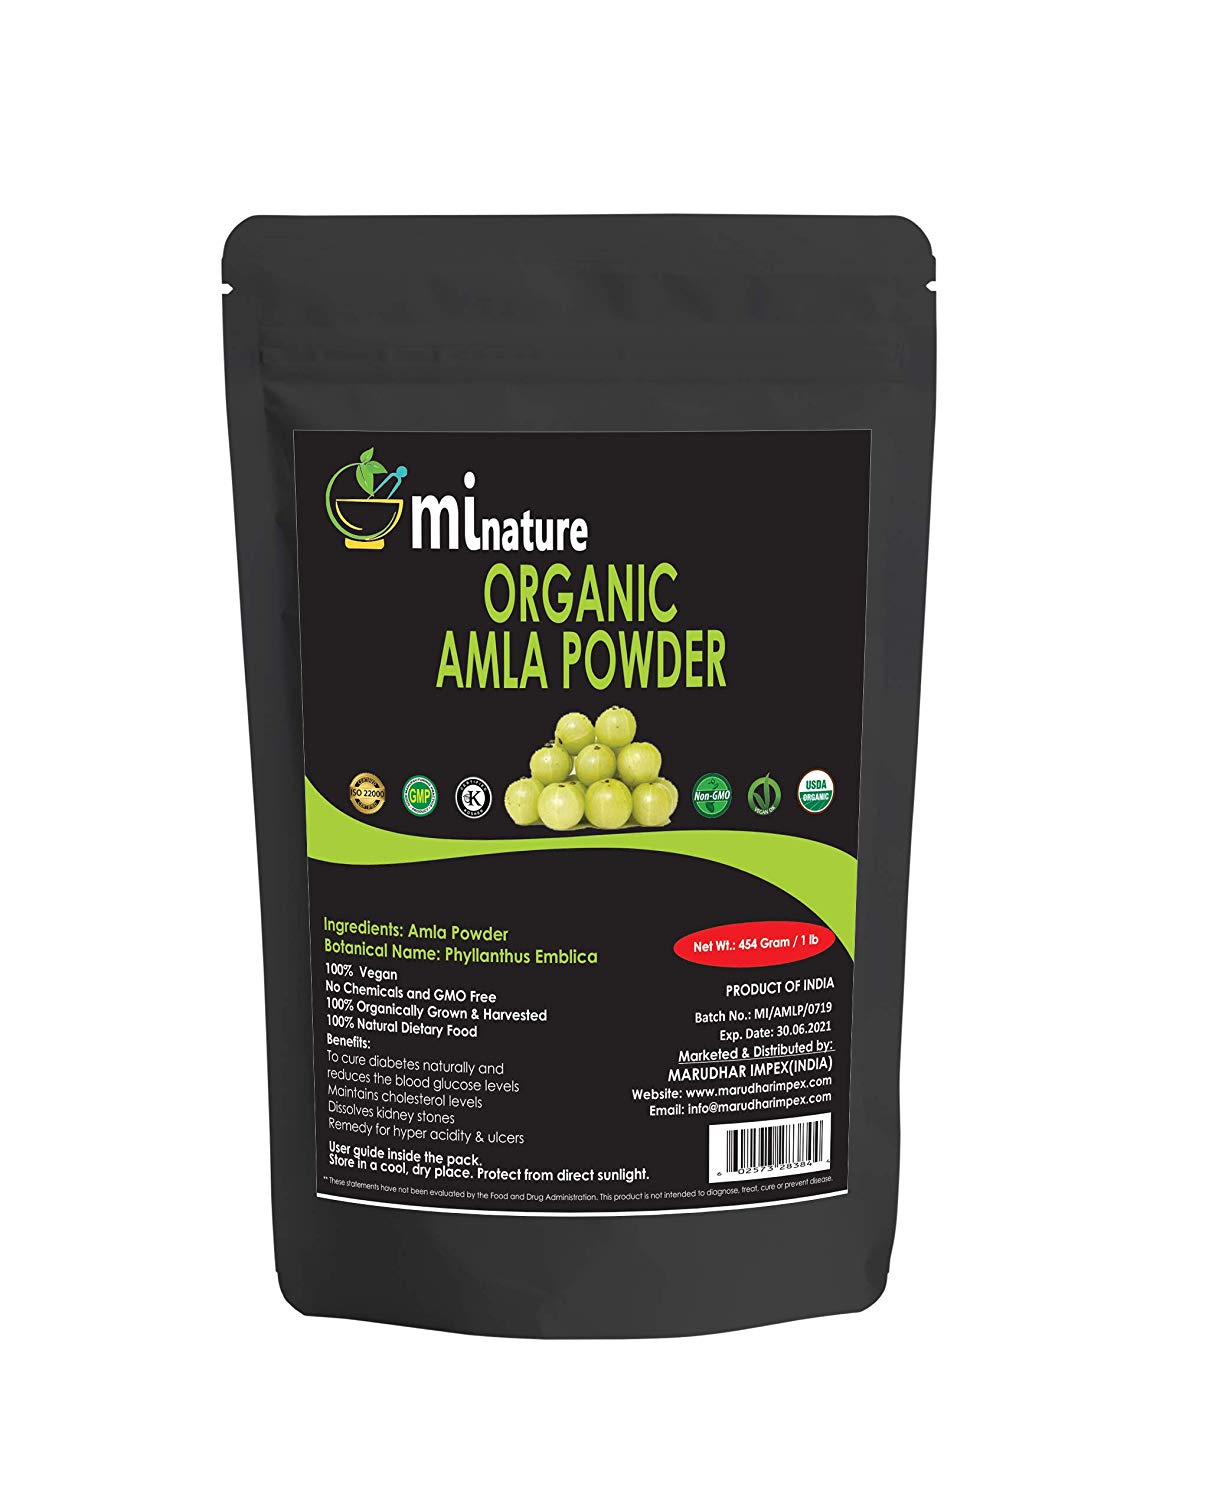 mi nature 100% Pure, Natural and Organic 454g Amla Powder with Resealable Zip Lock Pouch